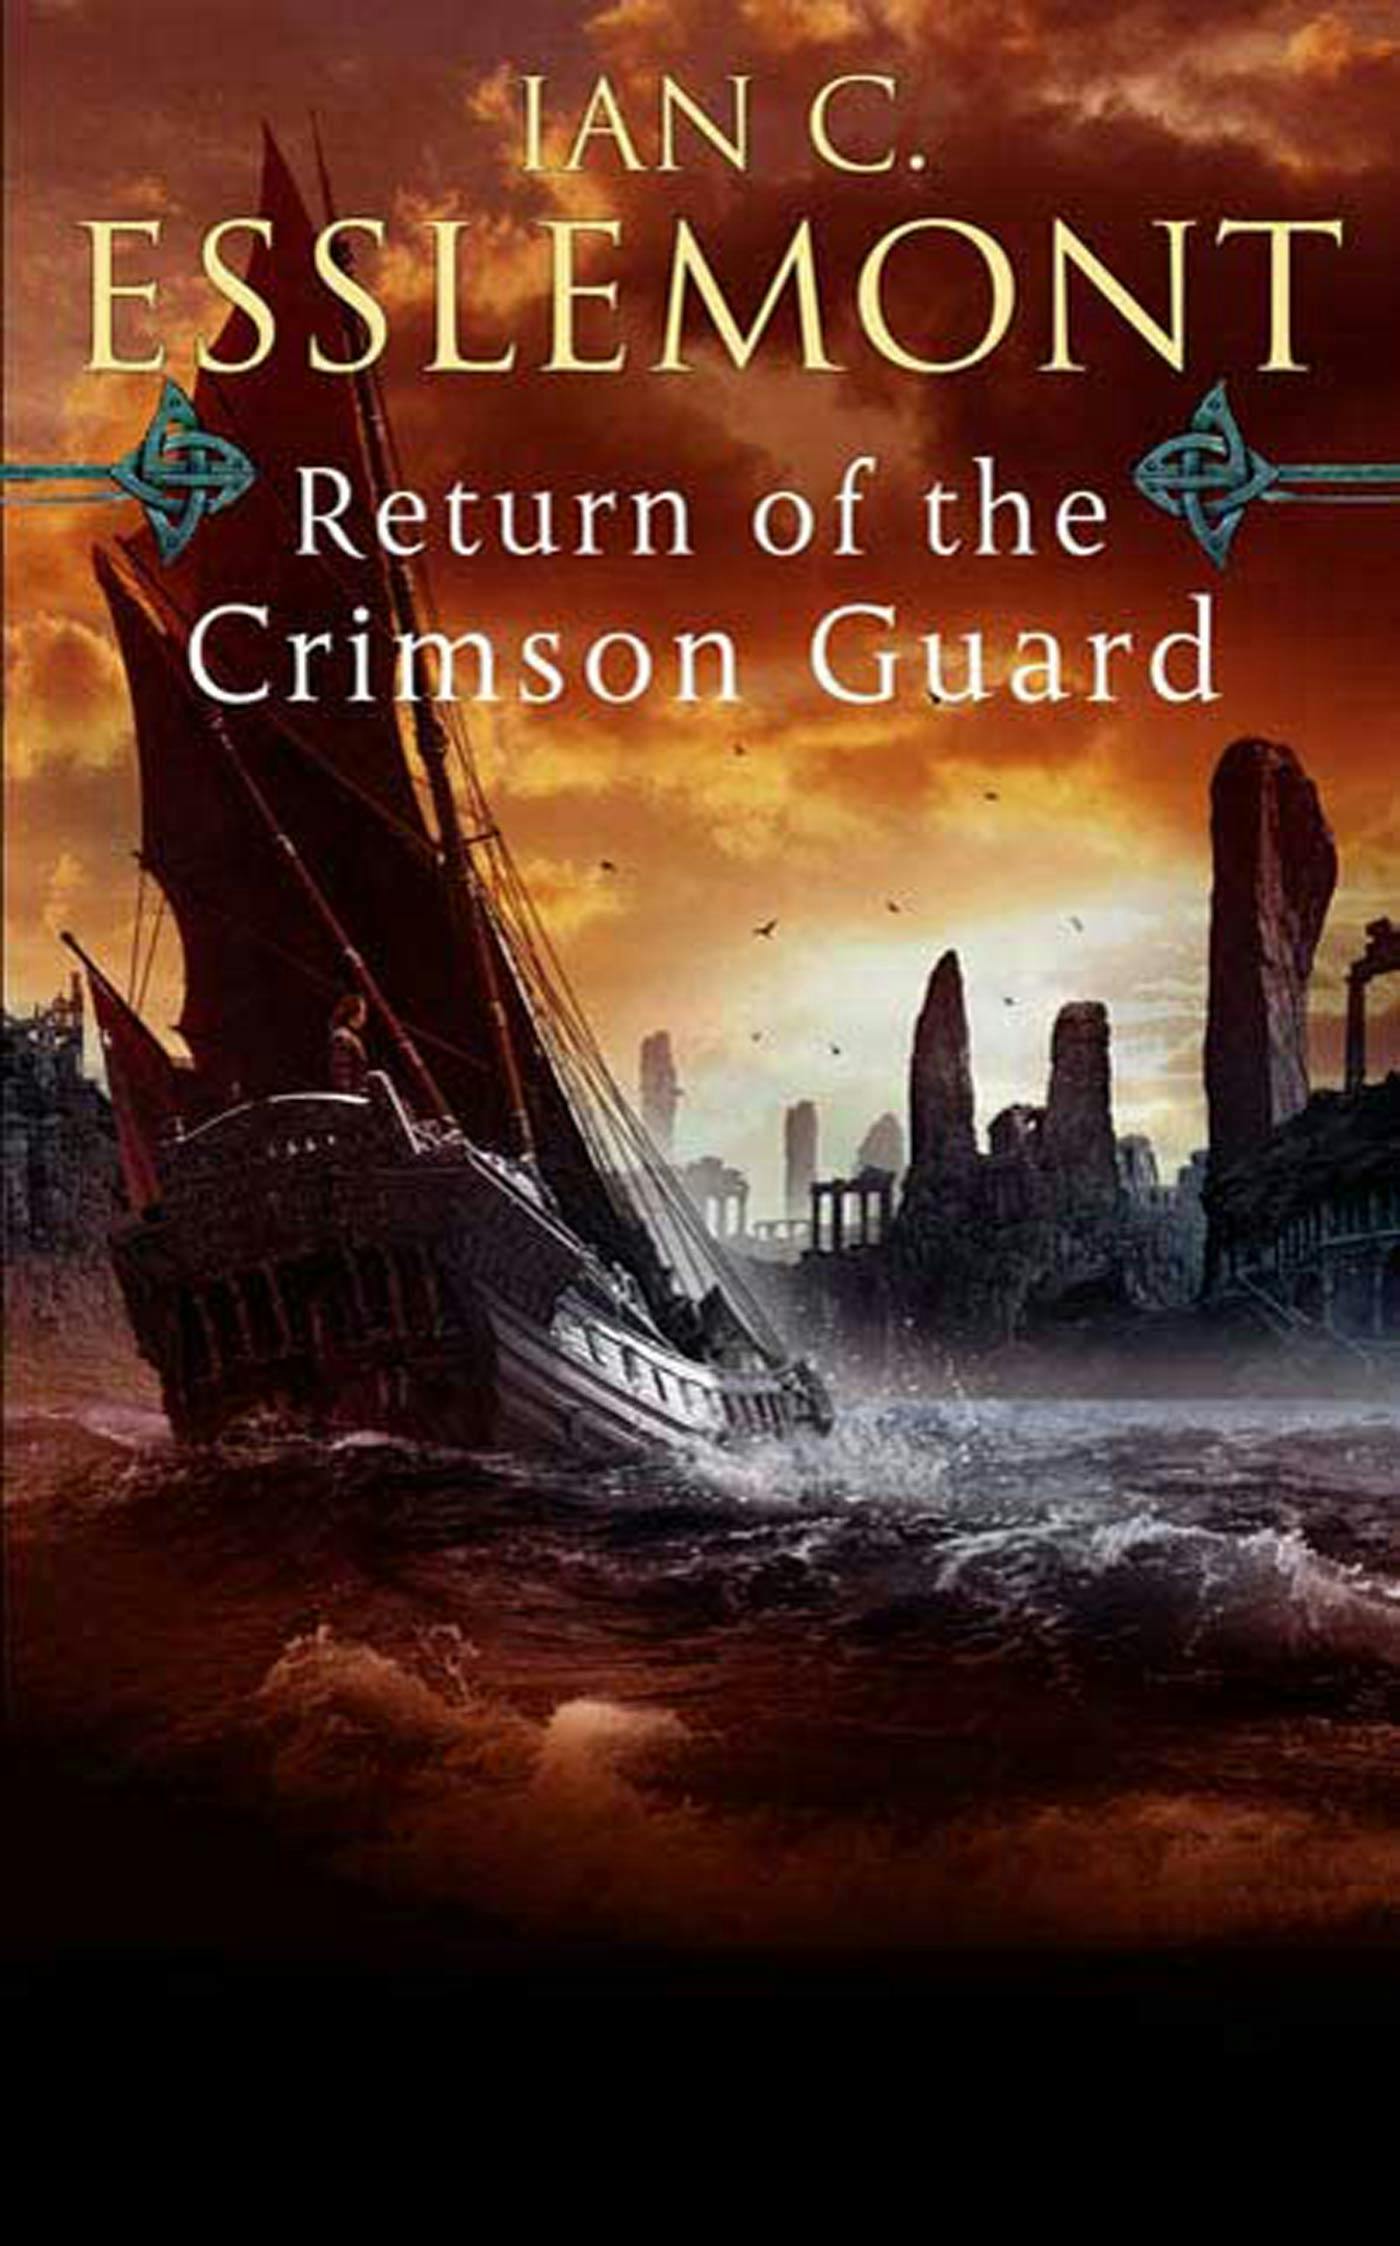 Cover for the book titled as: Return of the Crimson Guard